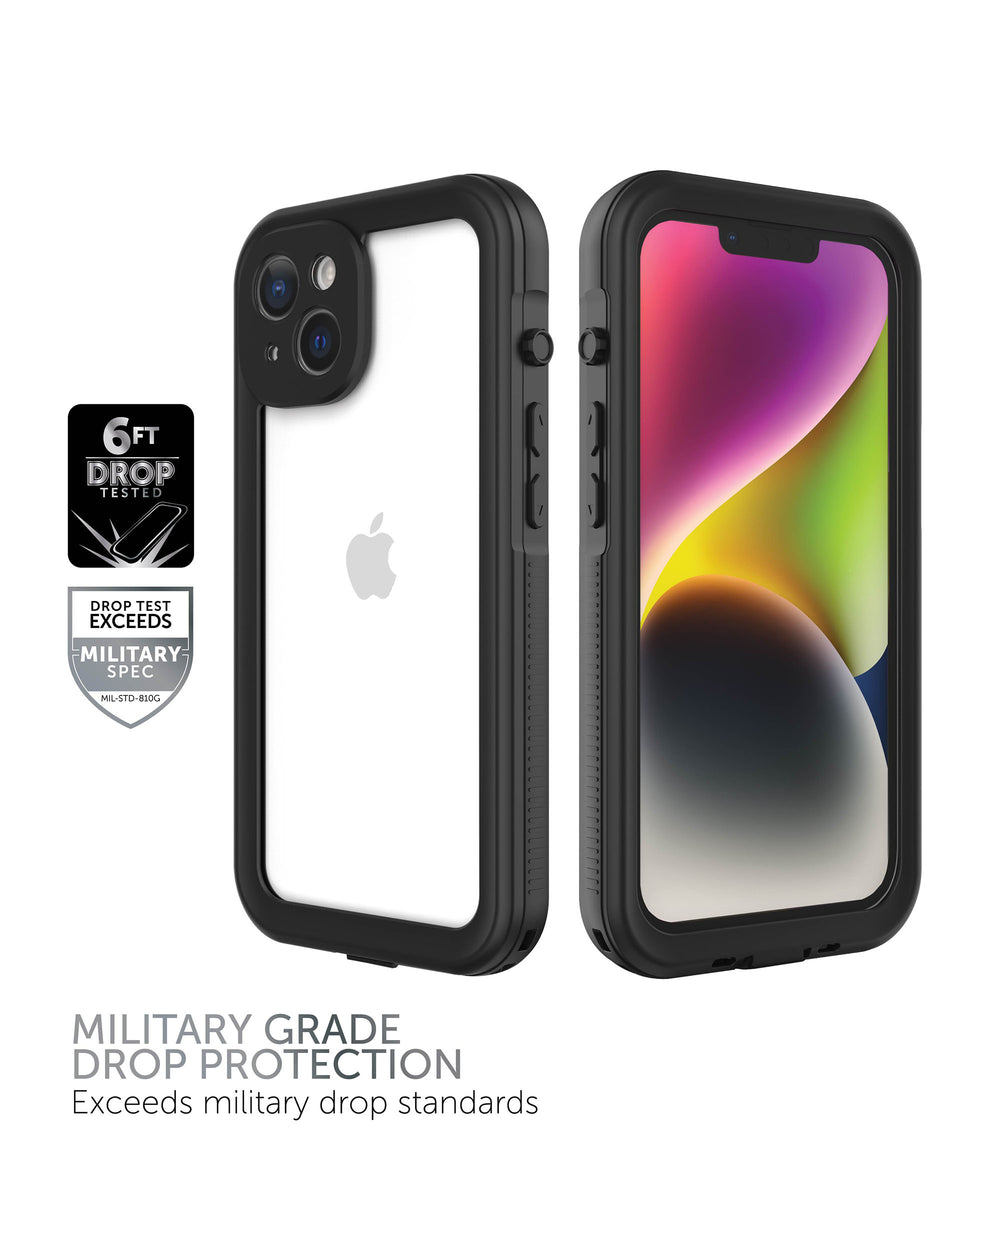 inkolelo Compatible with iPhone 13 Pro Max Waterproof Case, Built-in Screen  Full-Body Protector with Floating Strap IP68 Waterproof Case for iPhone 13